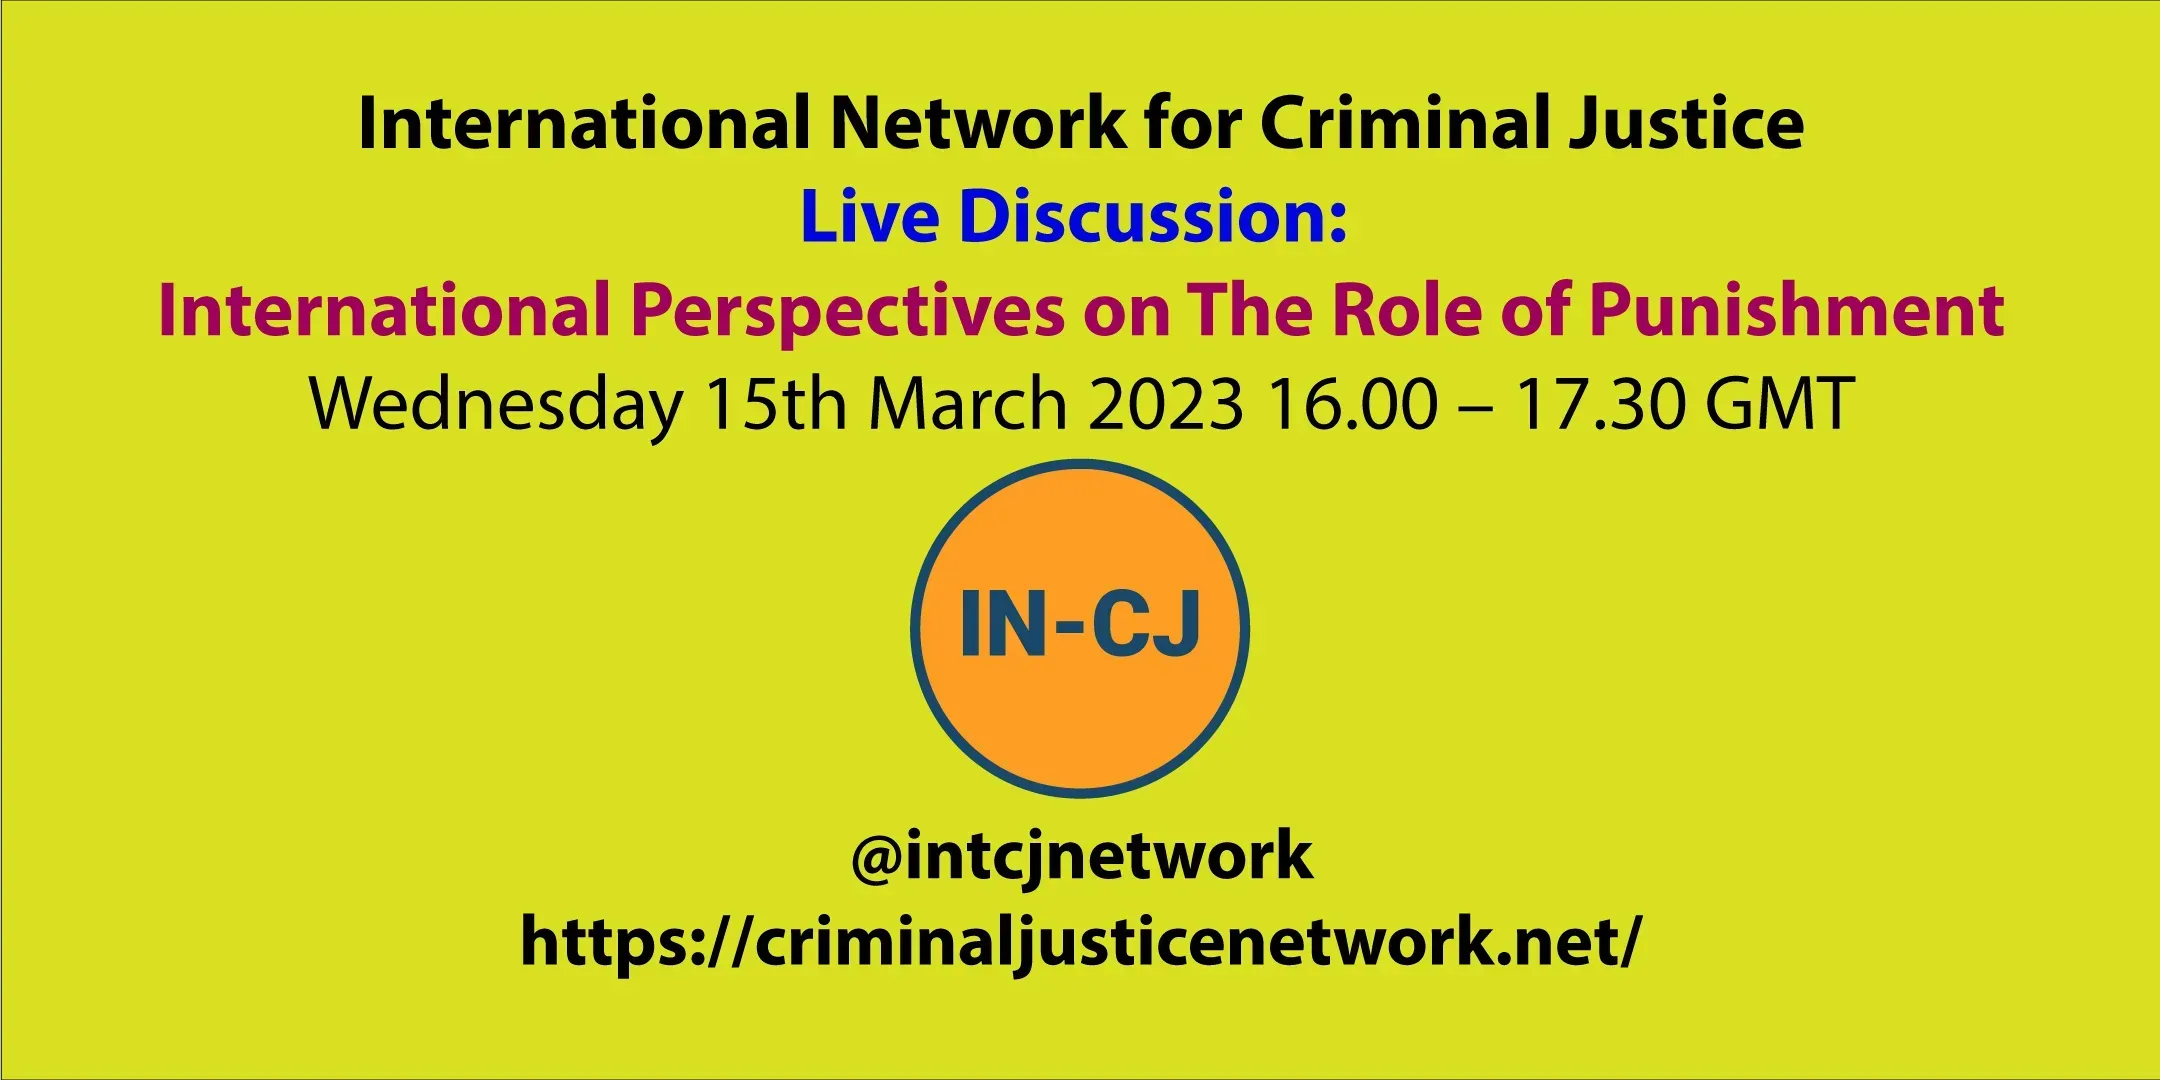 IN-CJ Discussion – International Perspectives on The Role of Punishment